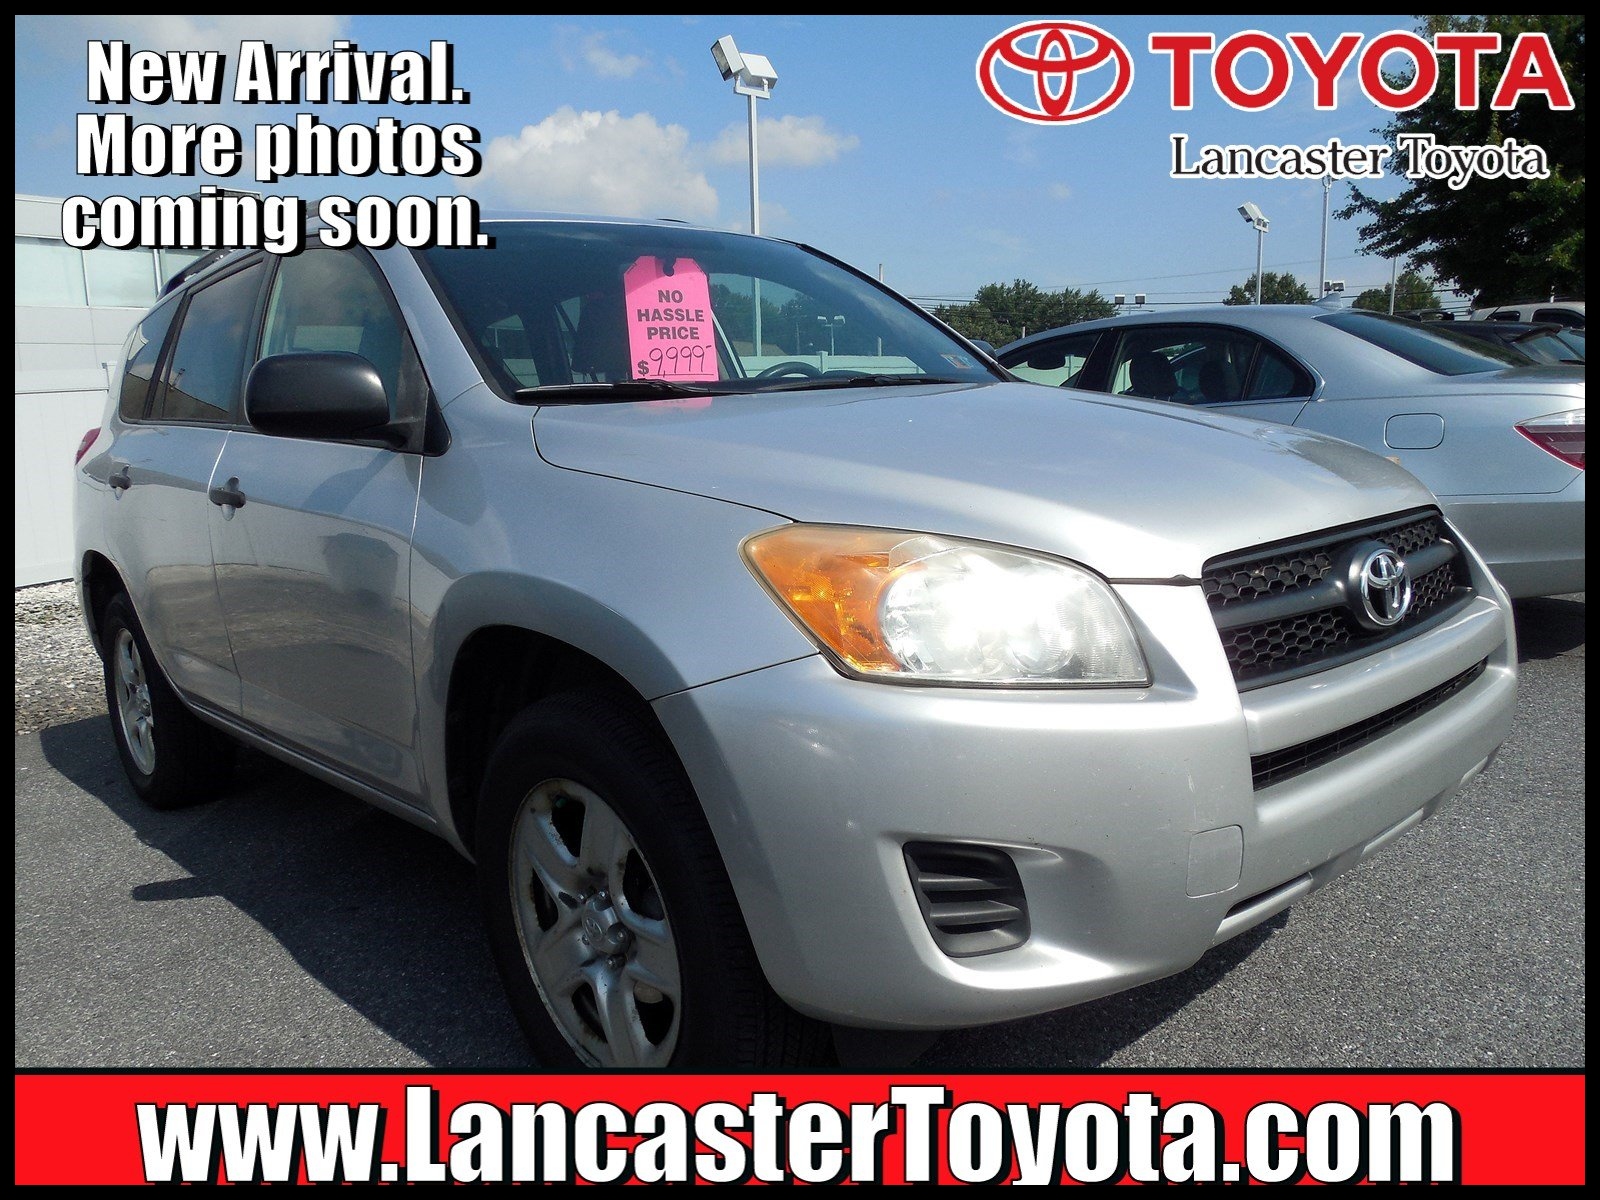 Pre Owned 2010 Toyota RAV4 4DR 2WD 4CYL 4SPD